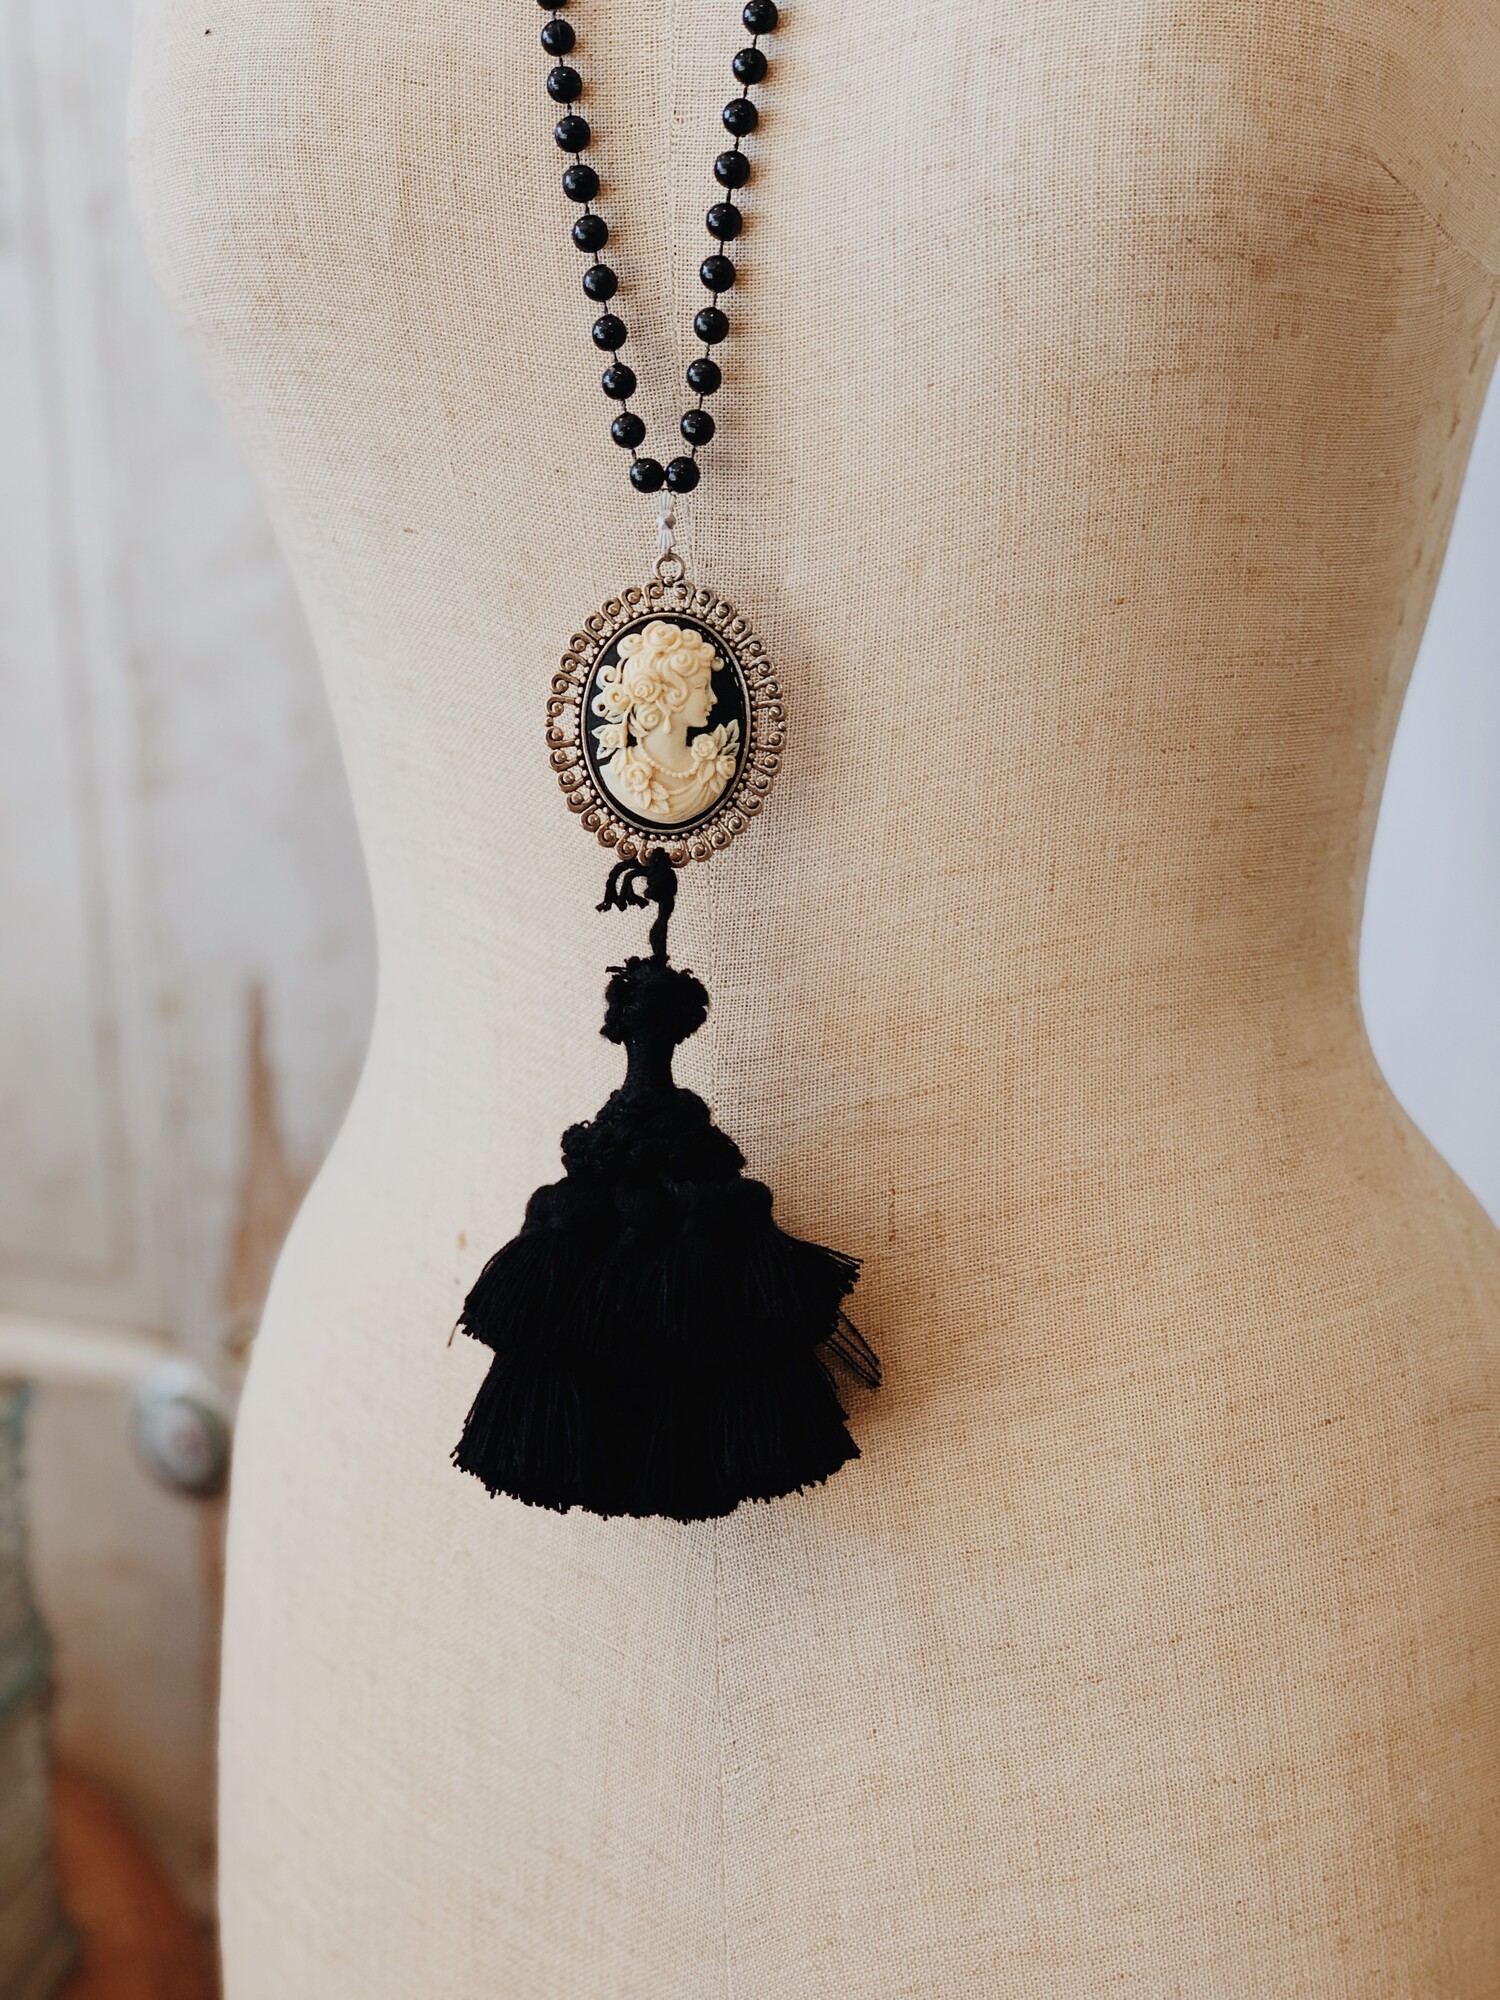 This Kelli Hawk Designs necklace is on a 32 inch strand of beads. The pendant is a beautiful black and cream cameo with a large black tassel attached!